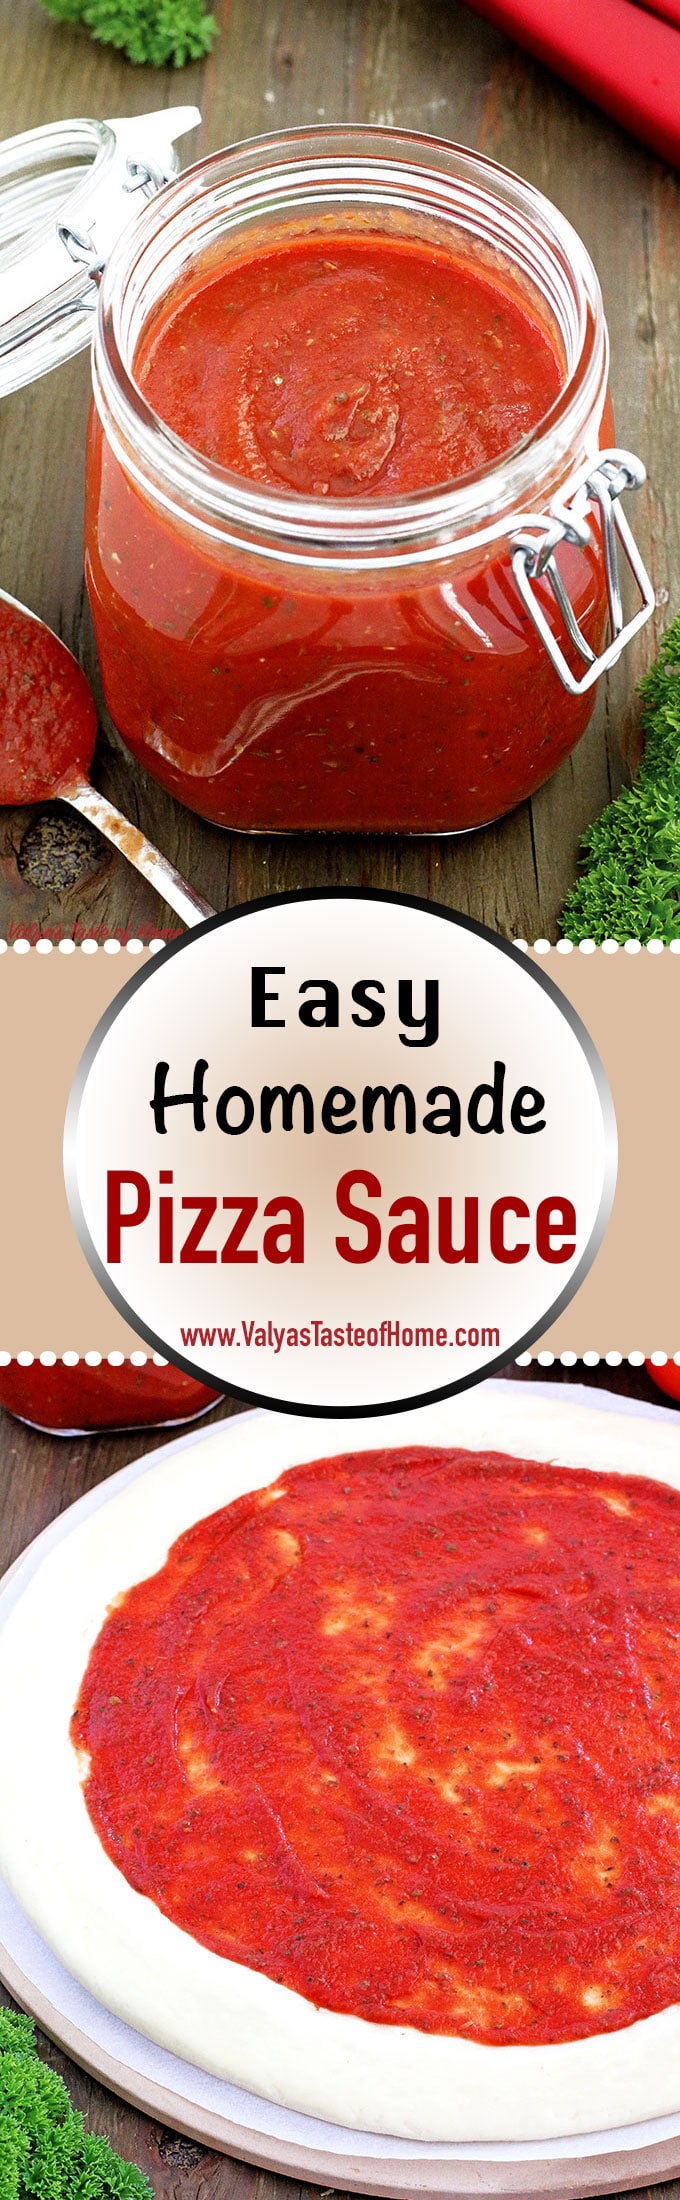 2 minute recipe, 4 ingredients pizza sauce, clean eating, delicious, easy, Easy Homemade Pizza Sauce Recipe, garlic powder, healthy eating, homemade pizza sauce, homemade tastes best, organic Italian seasoning, organic tomato sauce, pizza sauce, quick and easy recipe, sea salt, so flavorful, tasty